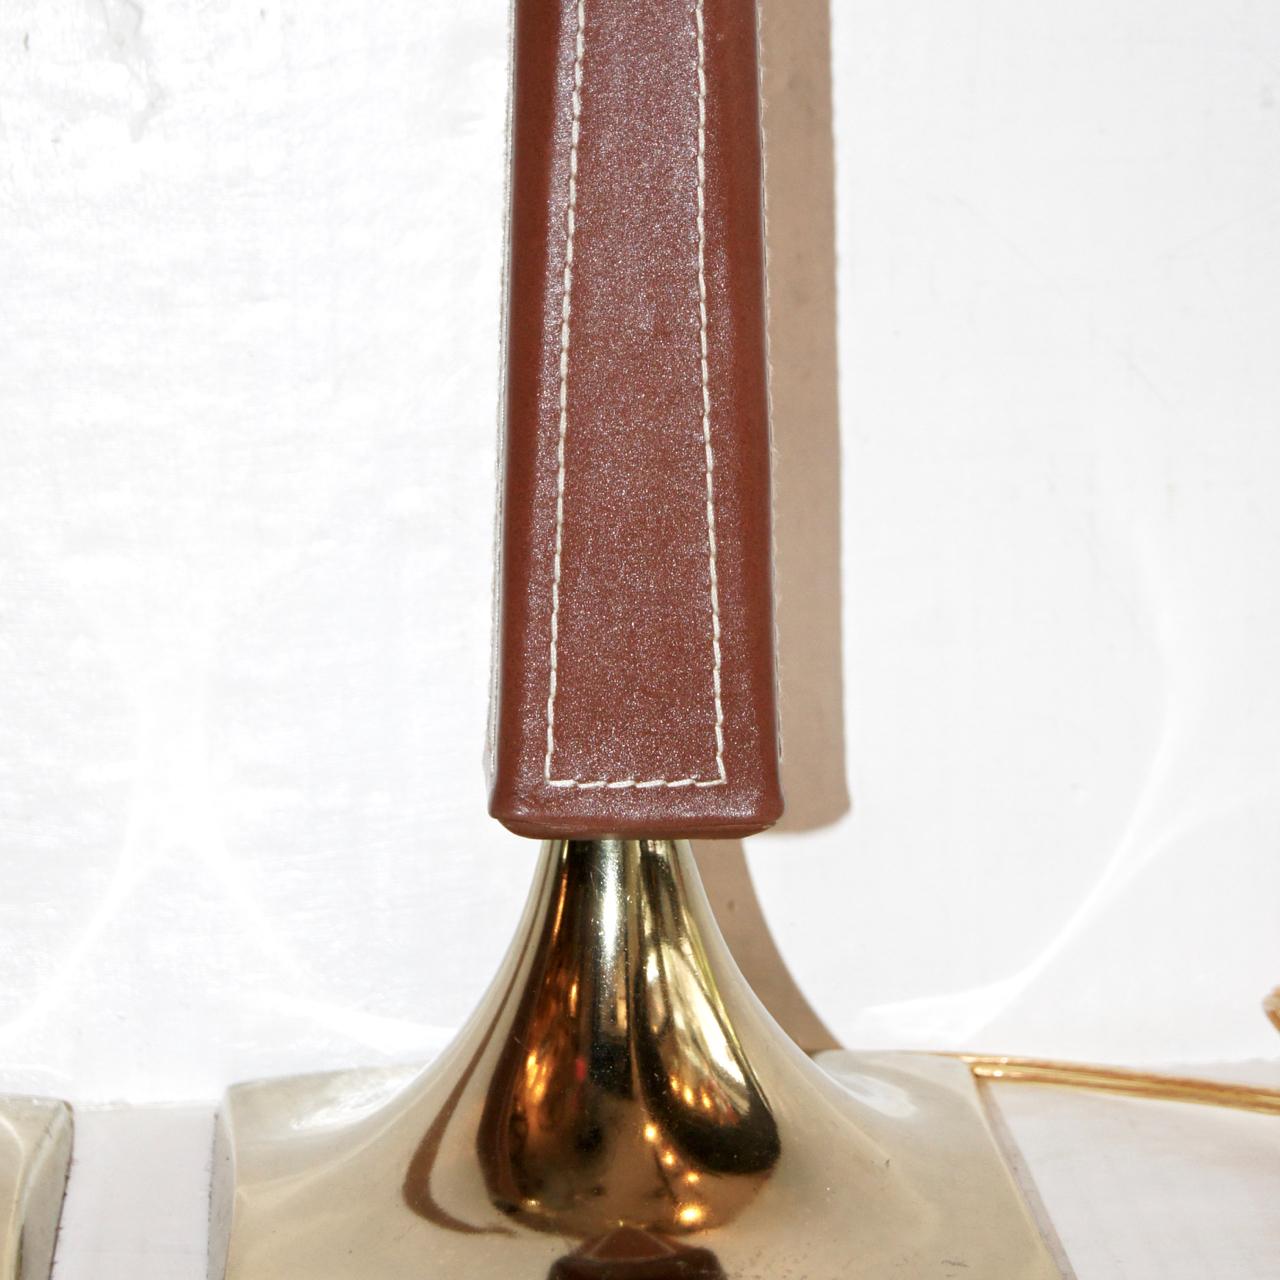 A pair of French circa 1950s stitched leather column table lamps with brass bases.

Measurements:
Height of body: 16